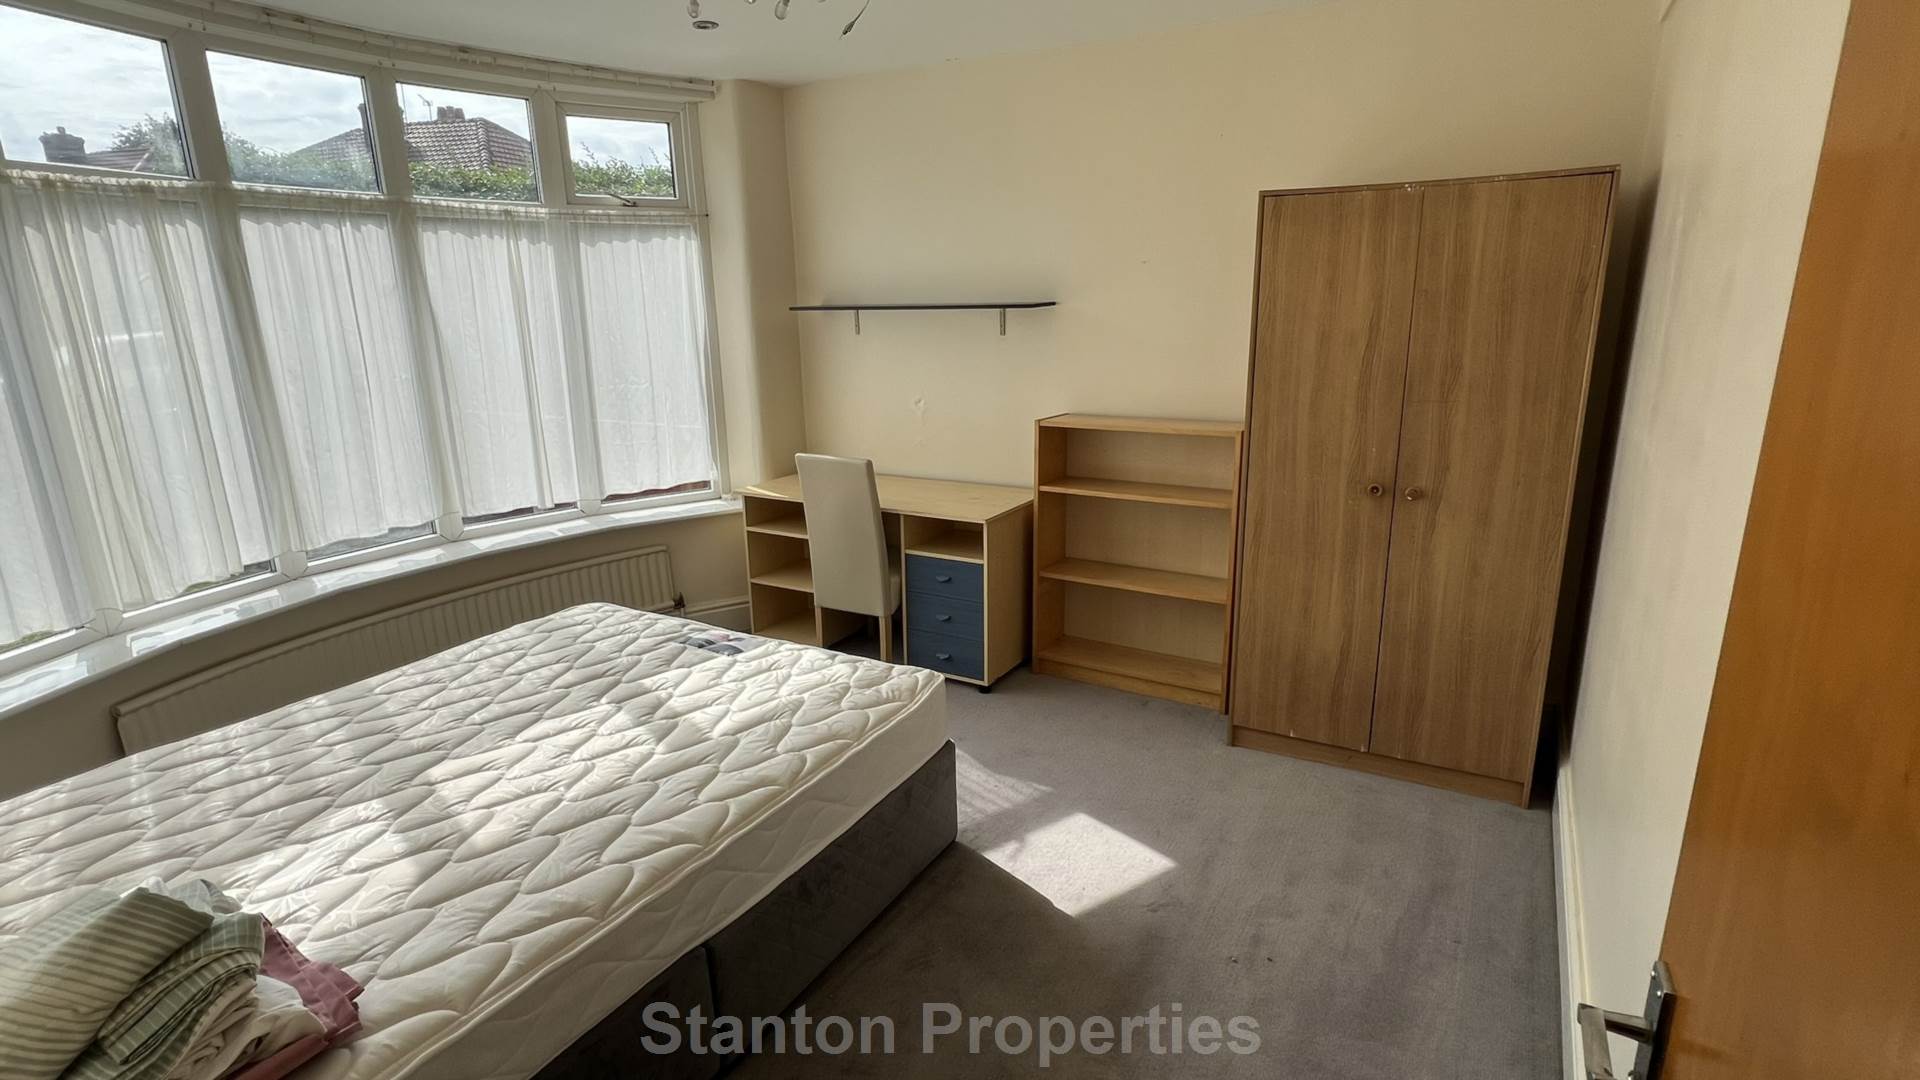 4 bed Semi-Detached House for rent in Manchester. From Stanton Properties